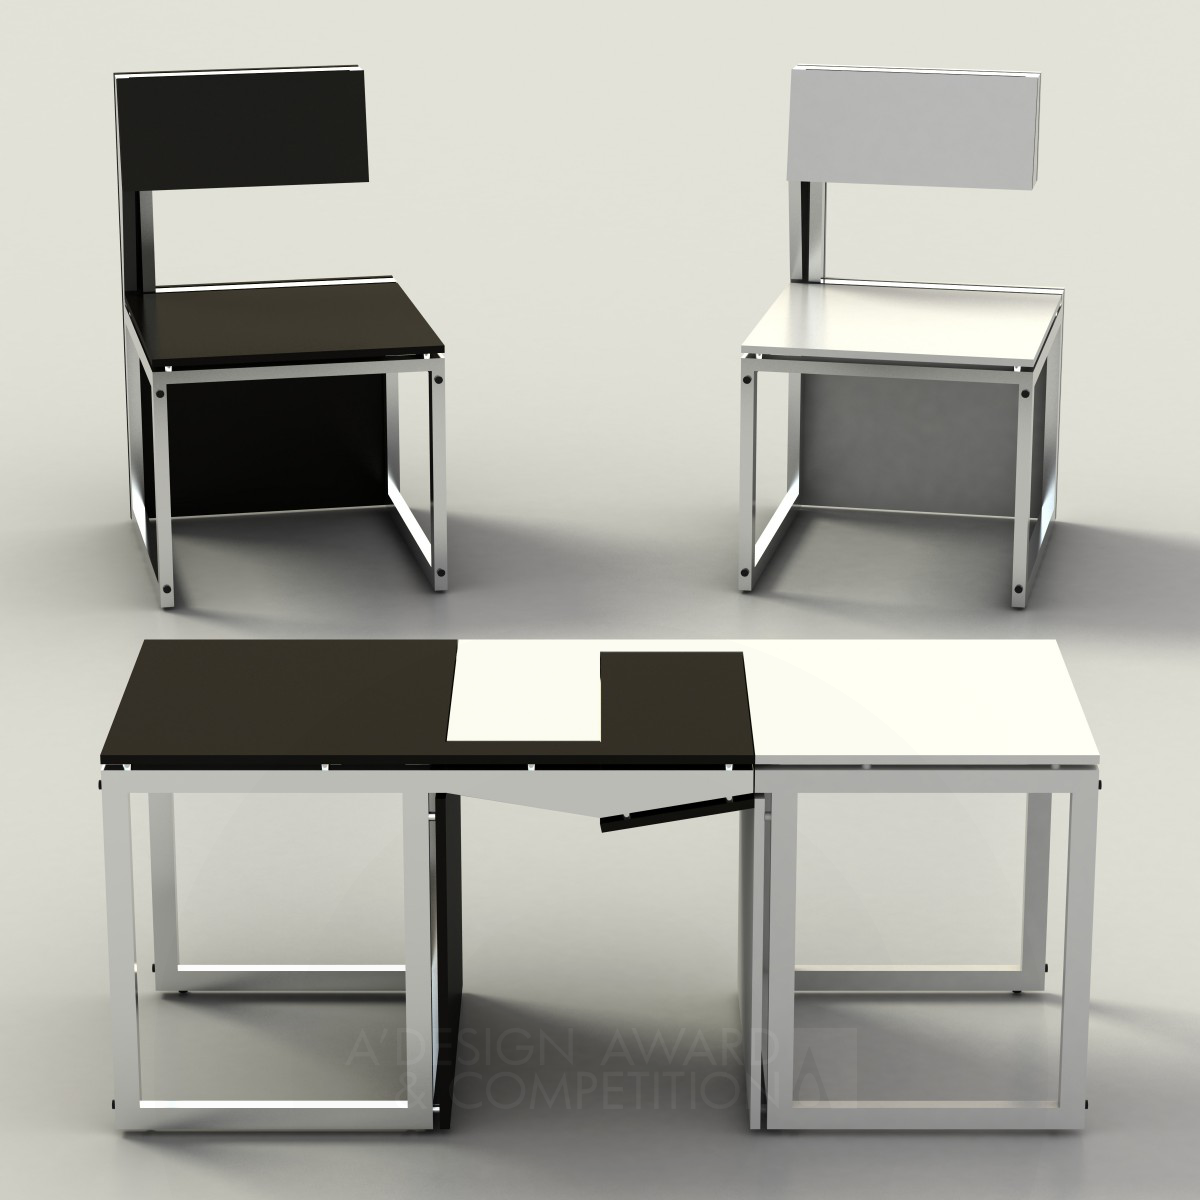 Sensei Transformable Chairs and Coffee Table by Claudio Sibille